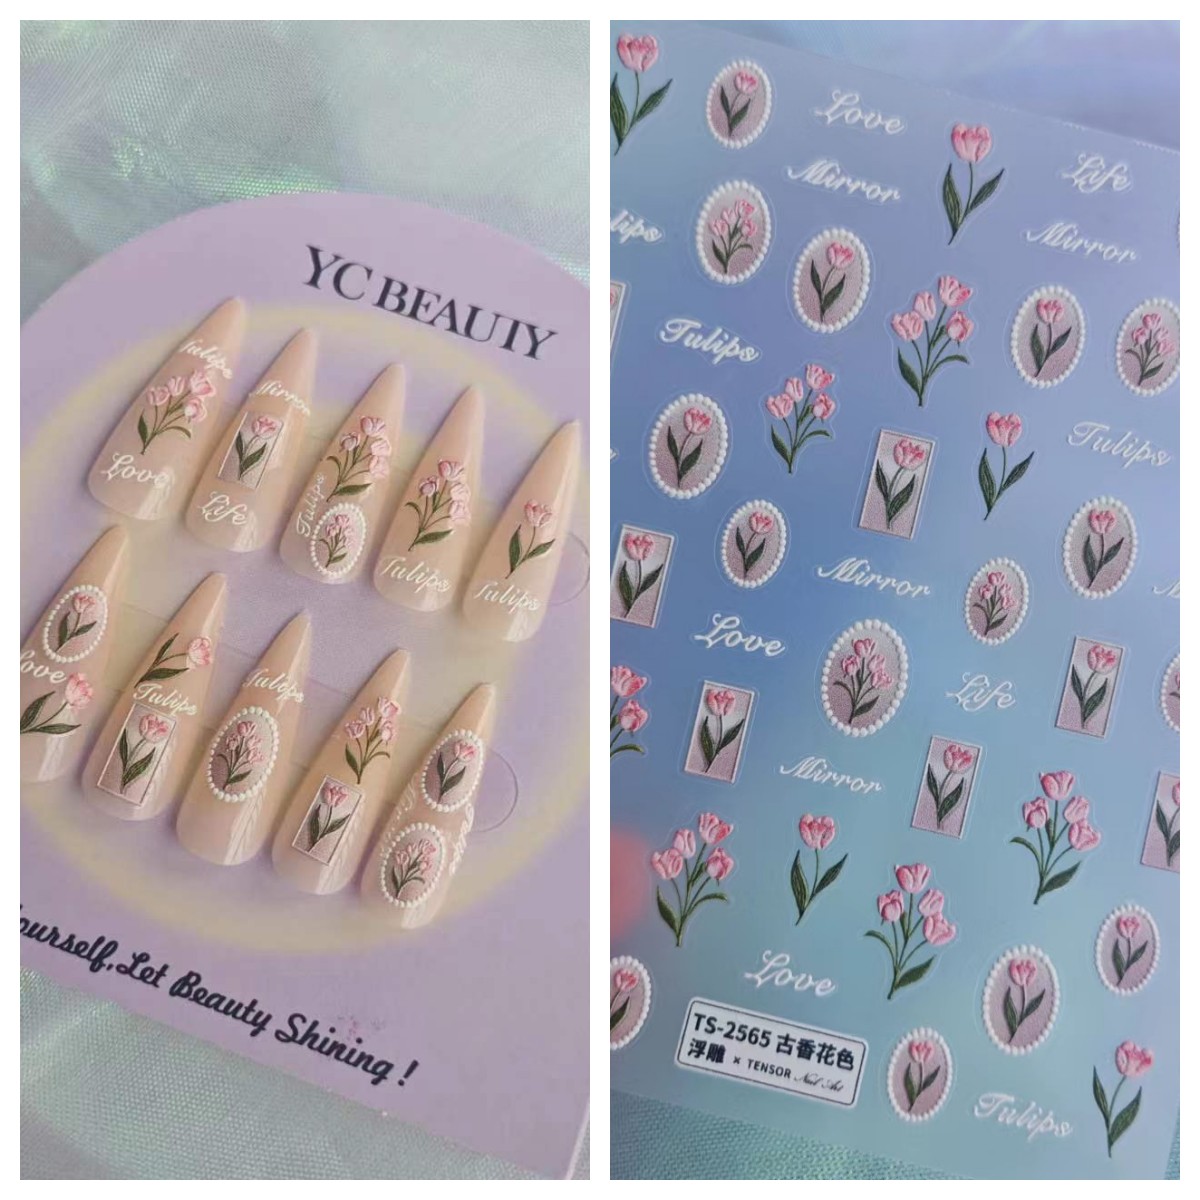 Different styles of manicure stickers are available for you to choose from, and you can do DIY manicure at home.

#nails #nailssticker #nailstickers #naildesign #nailsart #nailsupplies #nailsupply #nailsalons #Nailbook #nailart #nailaccessories #nailshop